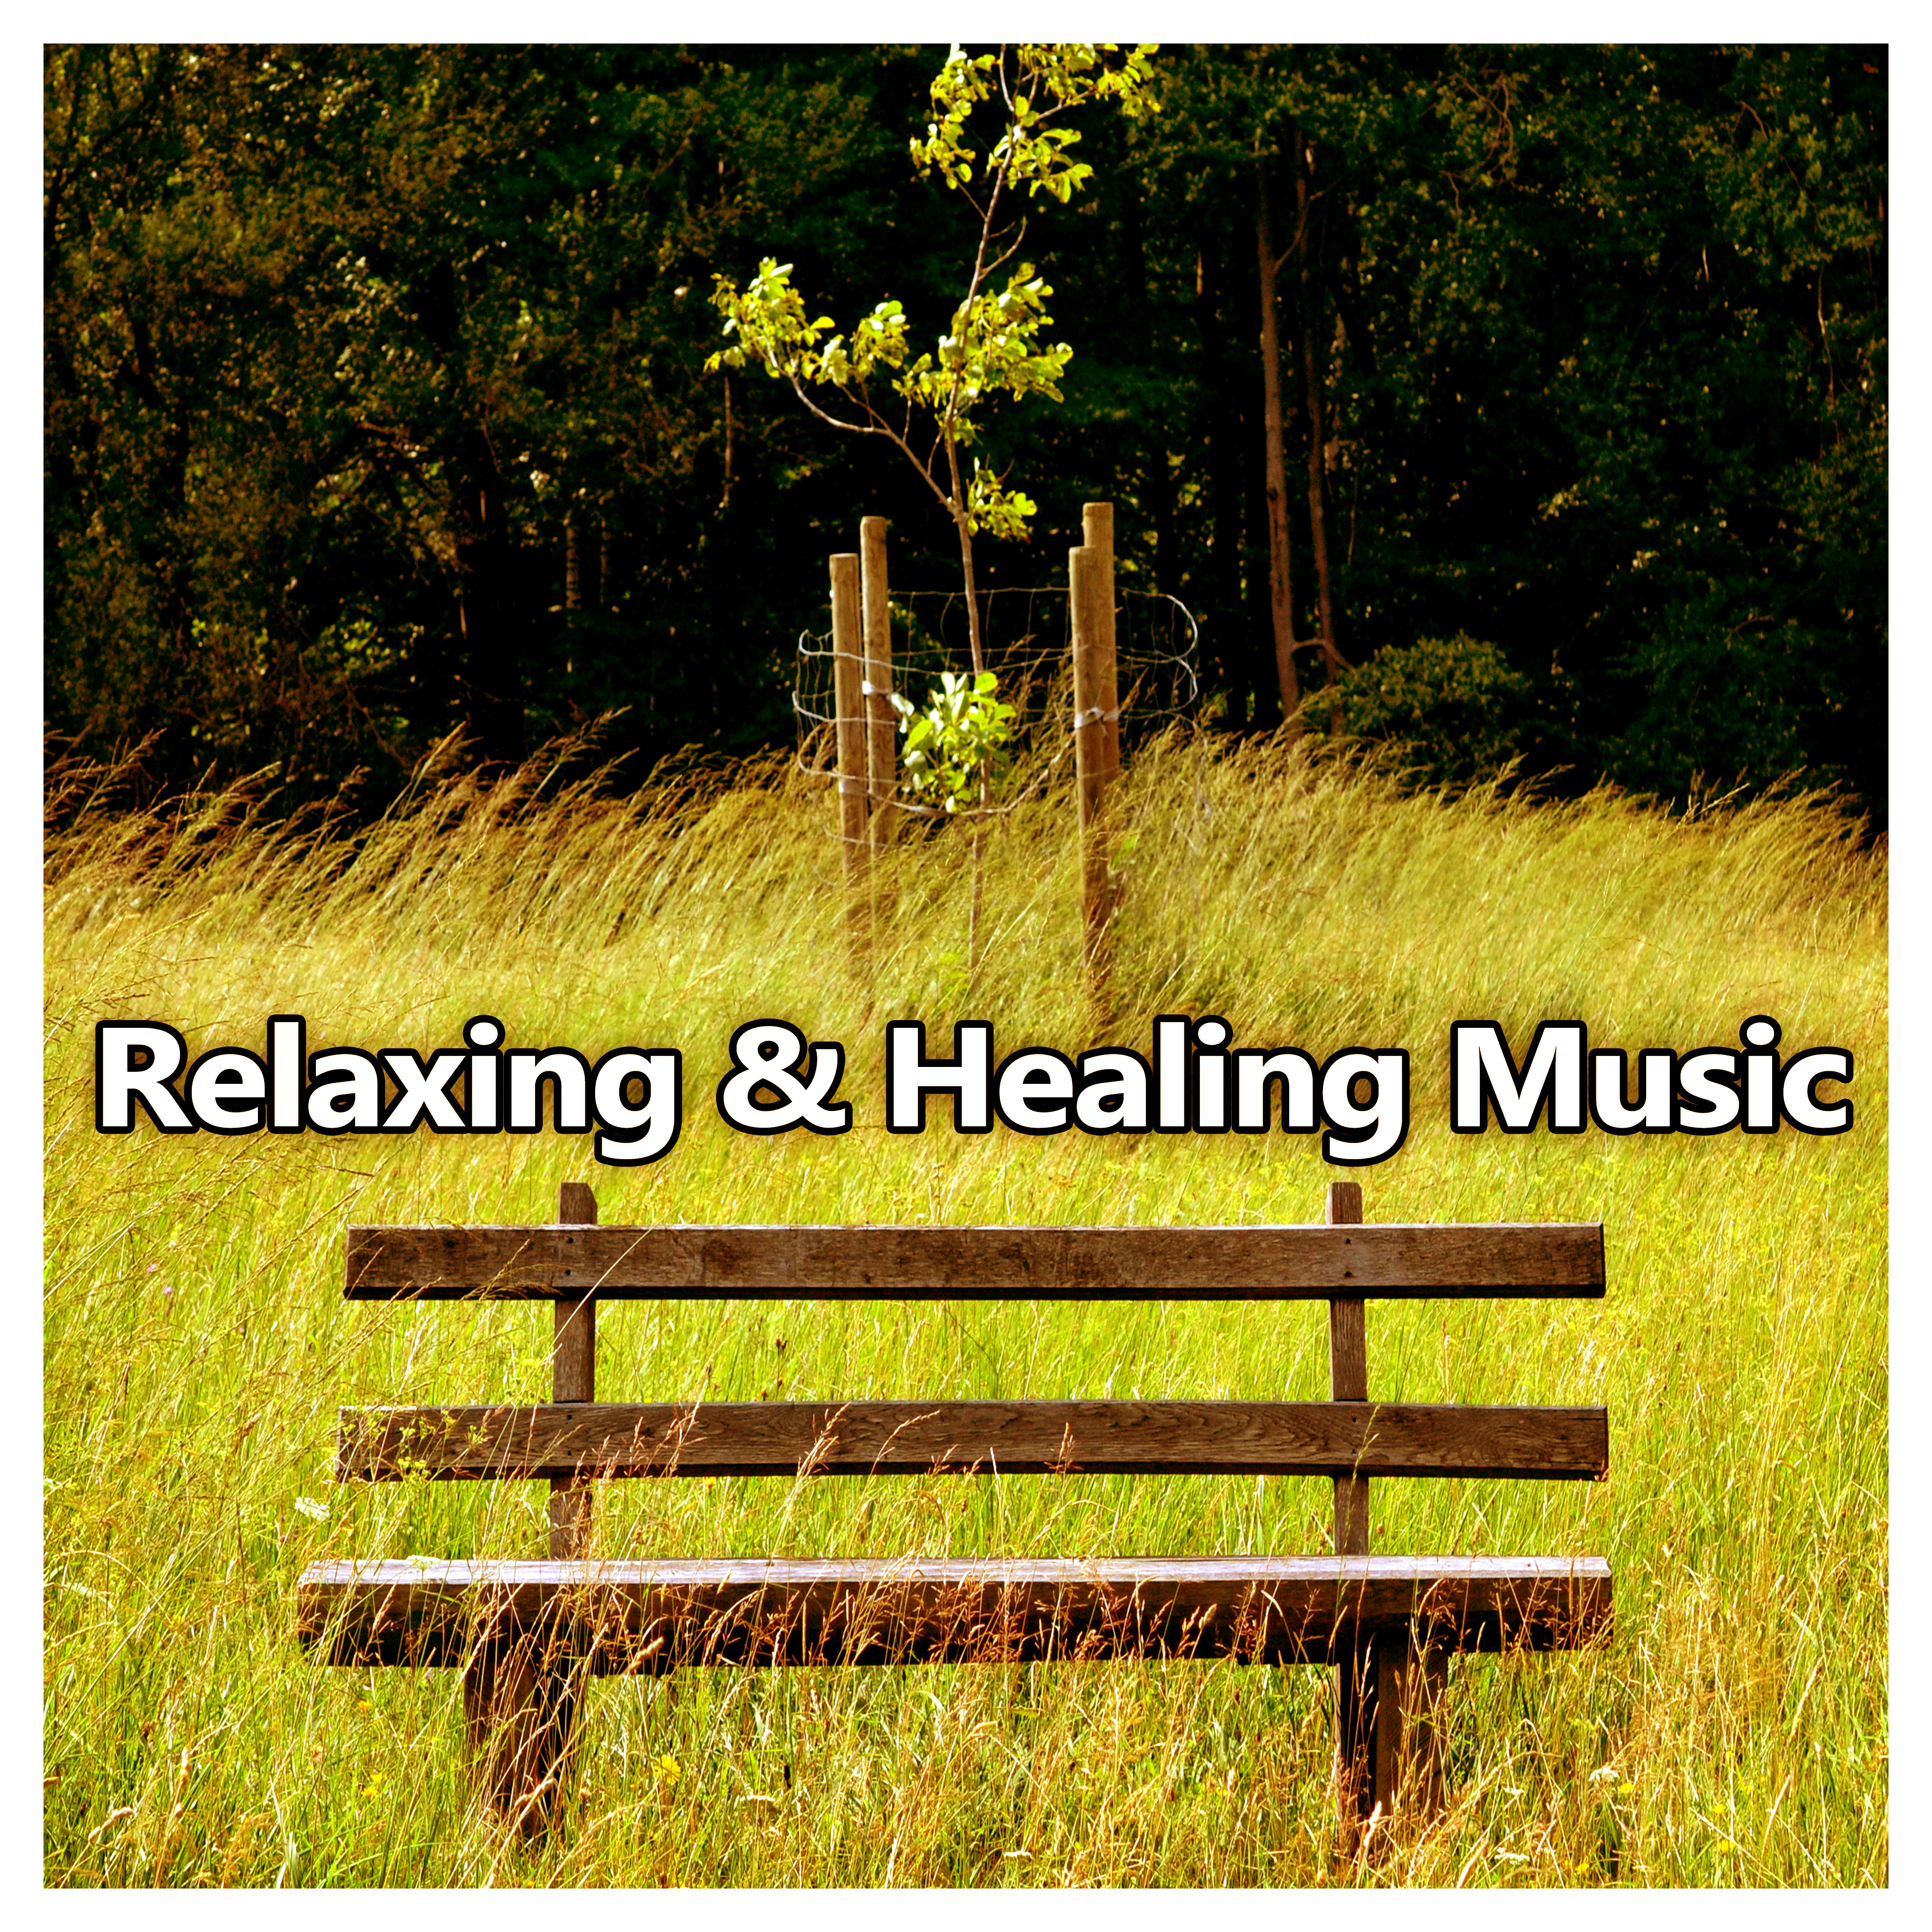 Relaxing & Healing Music – Soft Nature Sounds for Relax, Chill Yourself, Calming Music, Rest a Bit